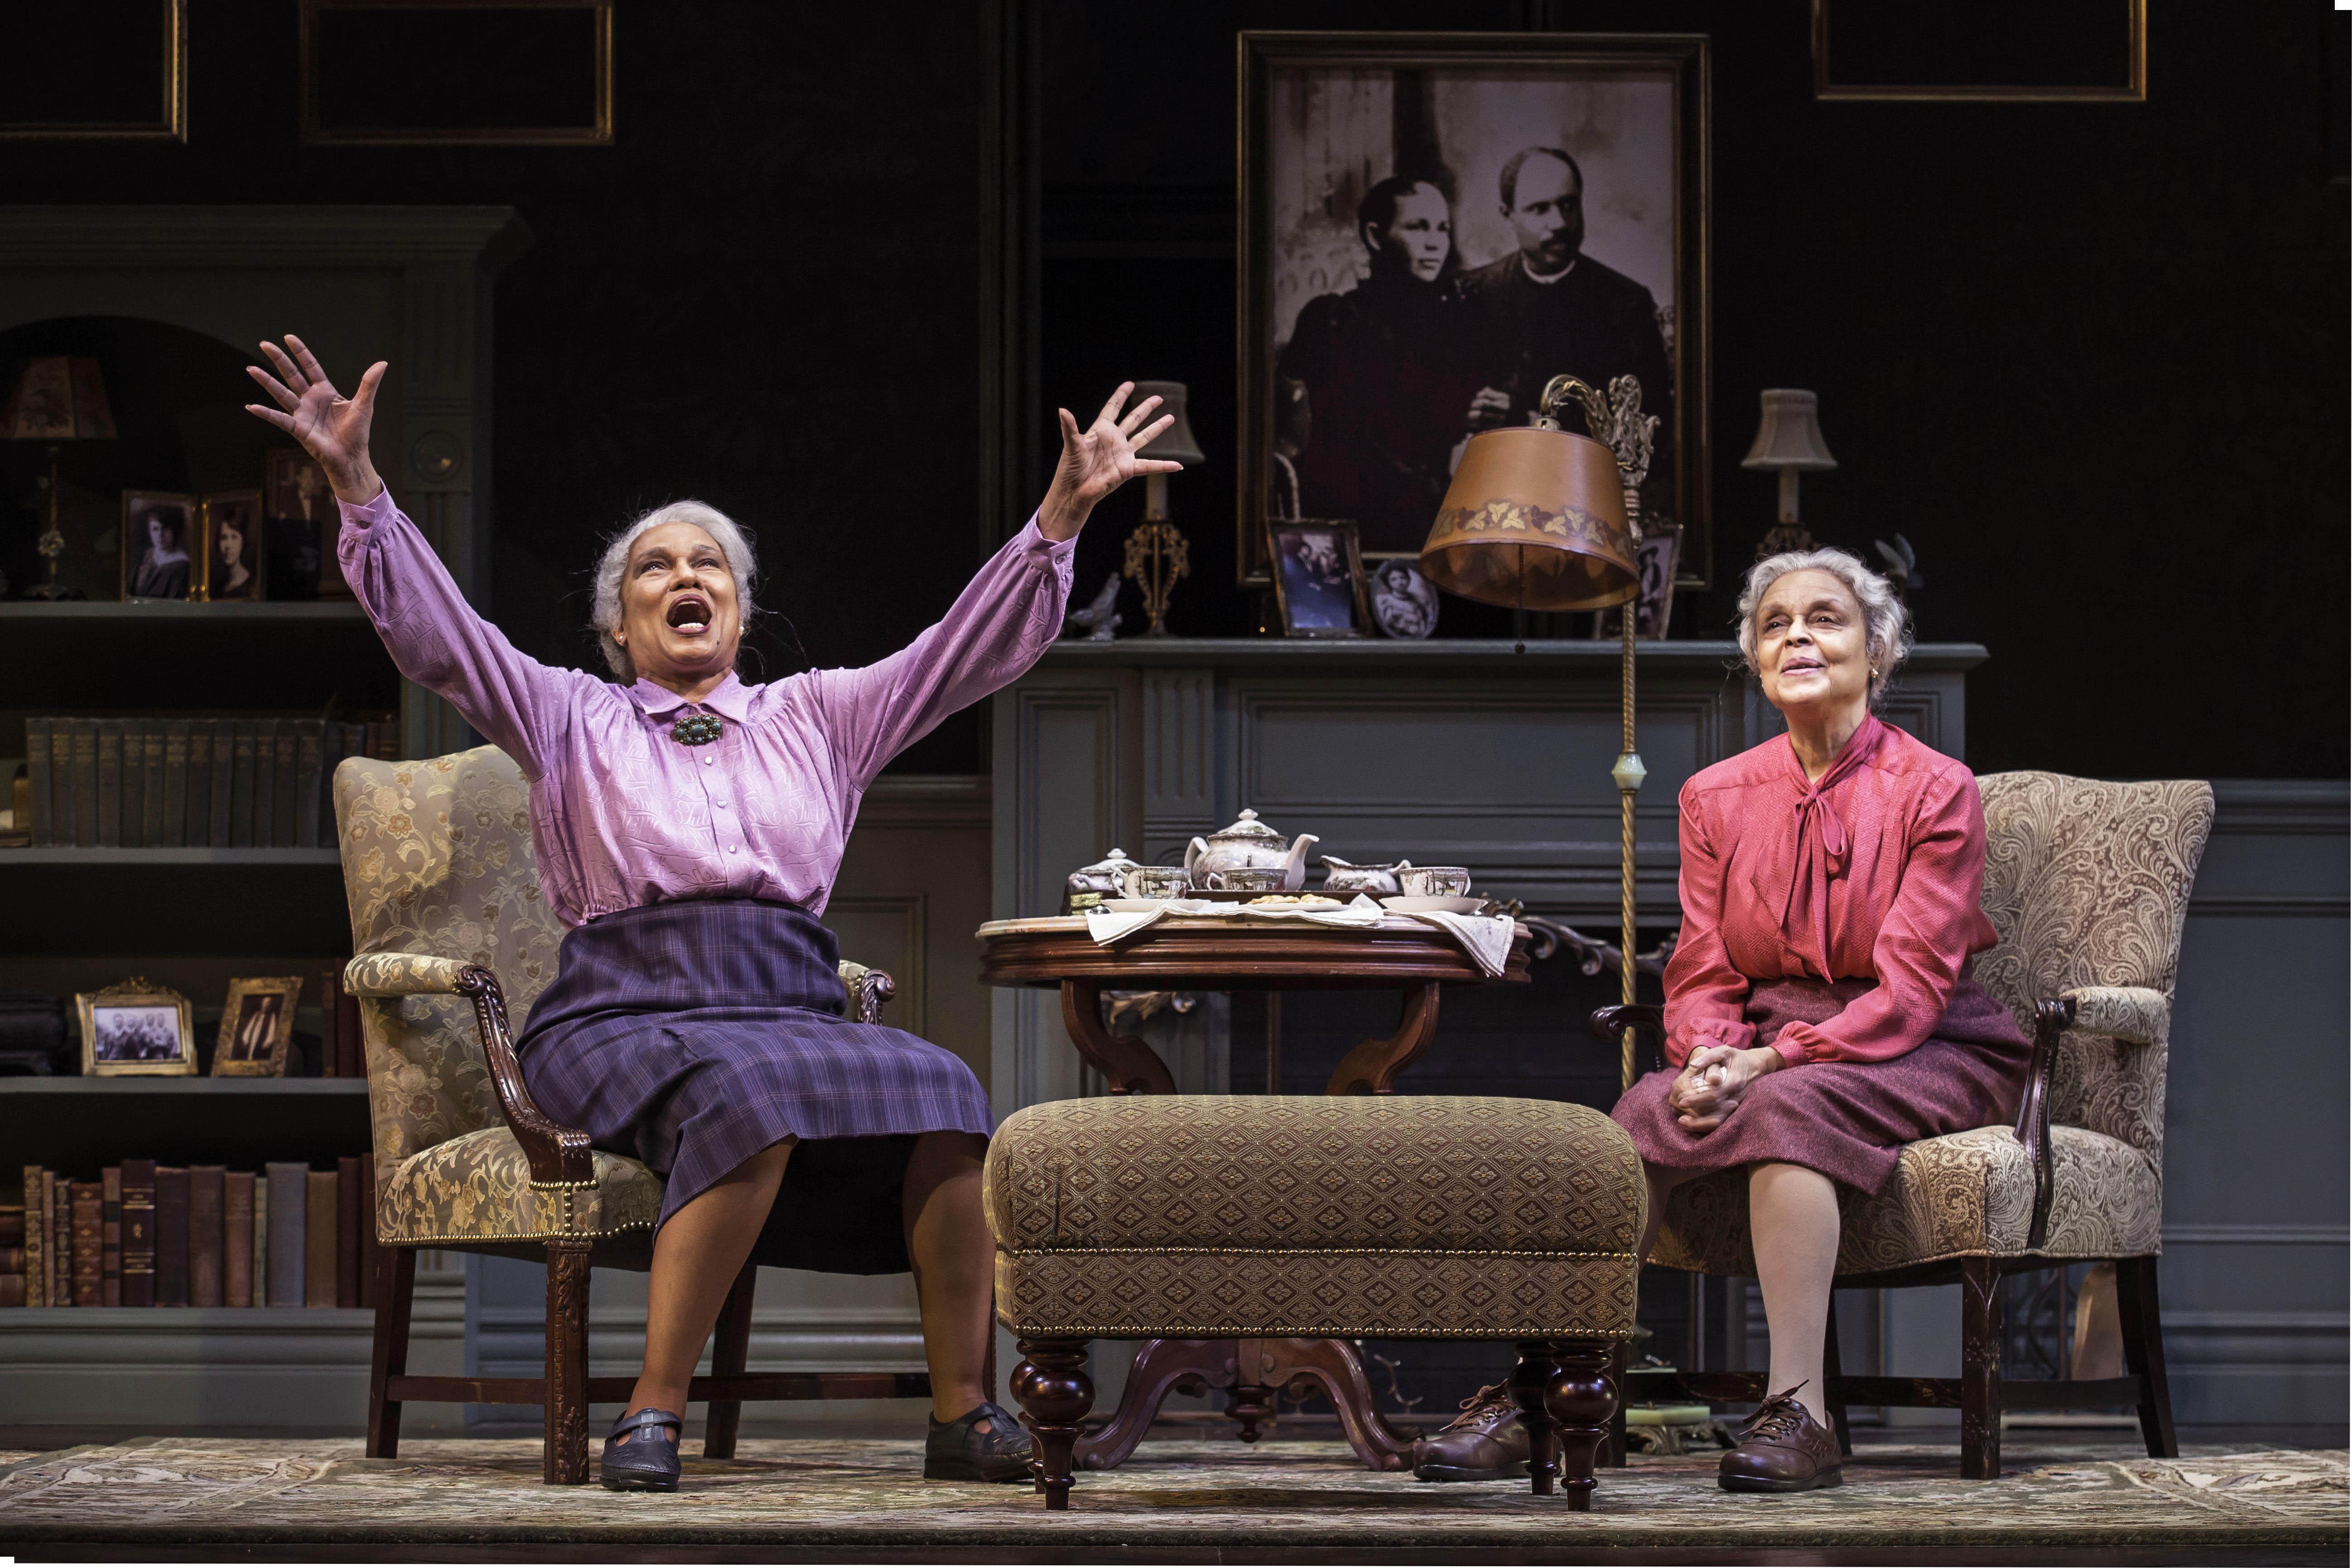 Ella Joyce and Marie Thomas in “Having Our Say: The Delany Sisters’ First 100 Years” at Goodman Theatre. (Photo credit: Liz Lauren)